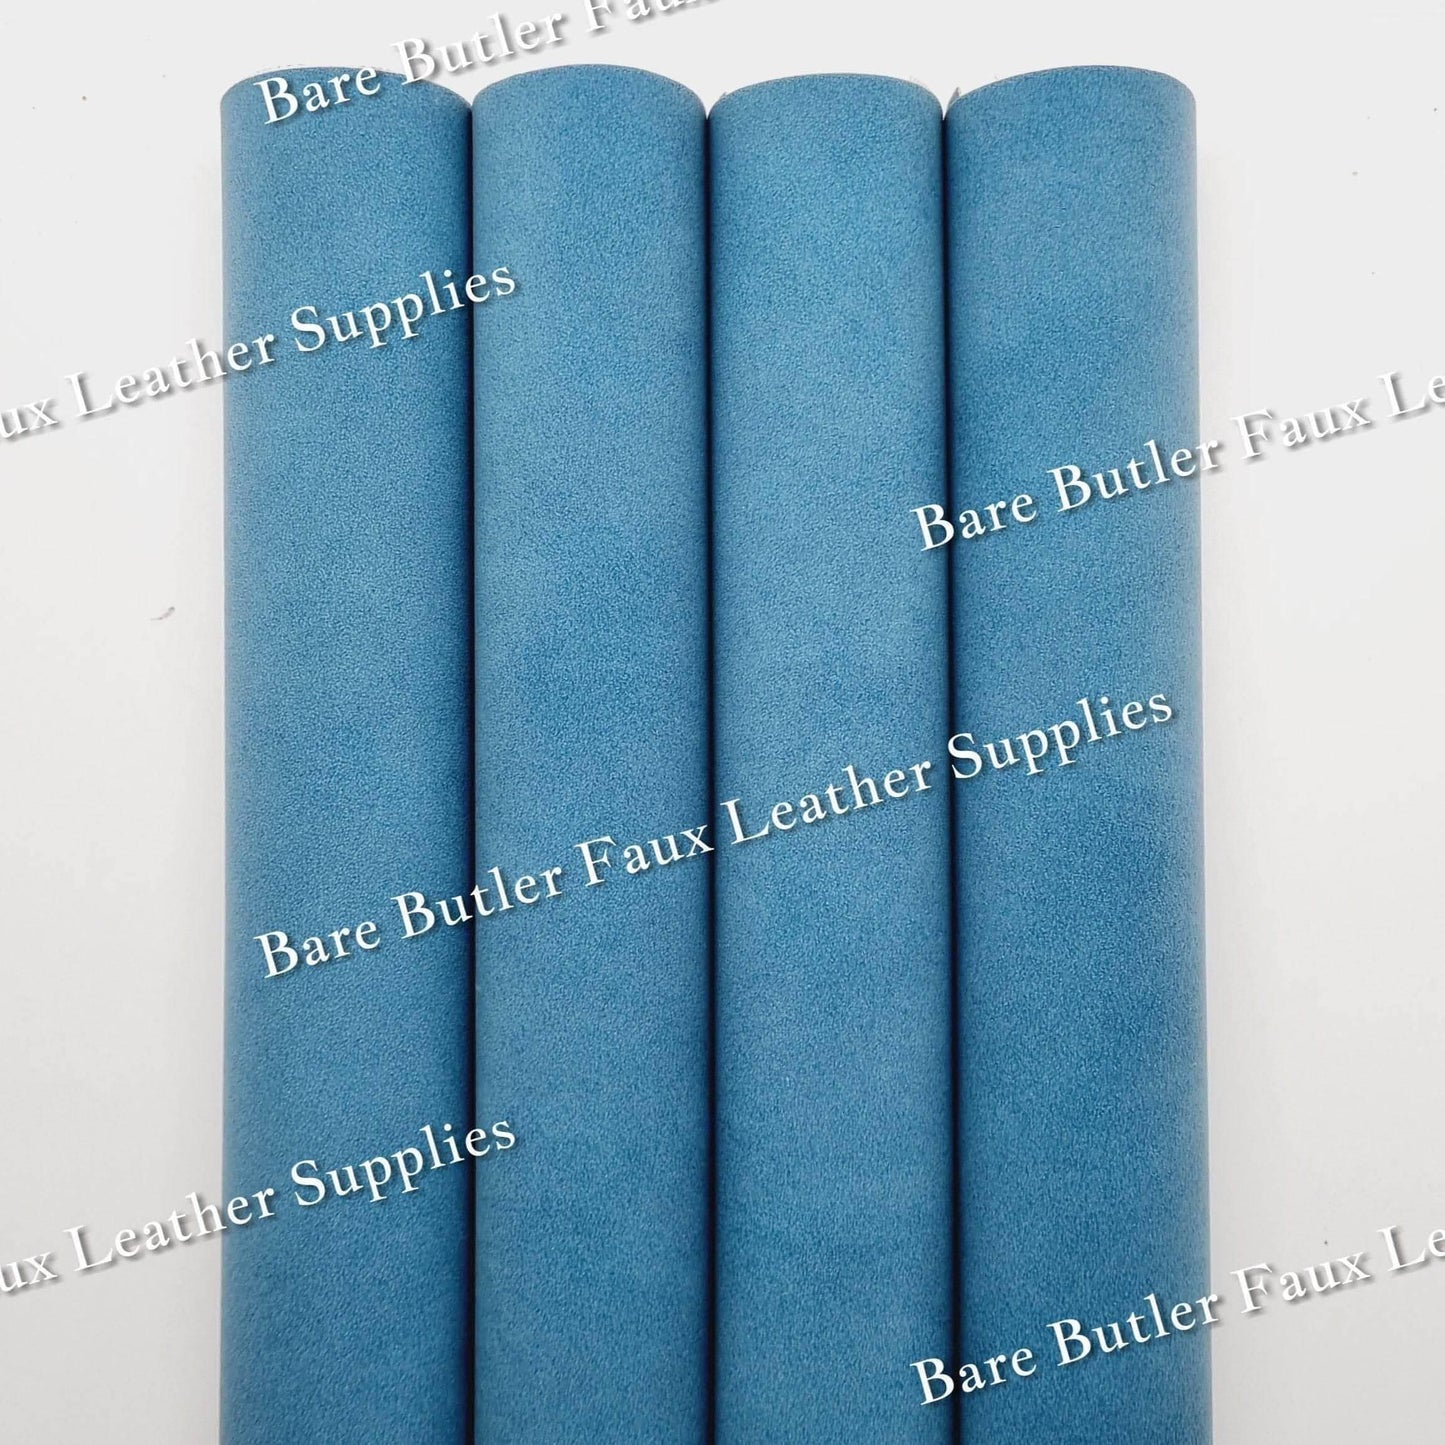 Suede -  Blue - Faux, Faux Leather, Suede - Bare Butler Faux Leather Supplies 